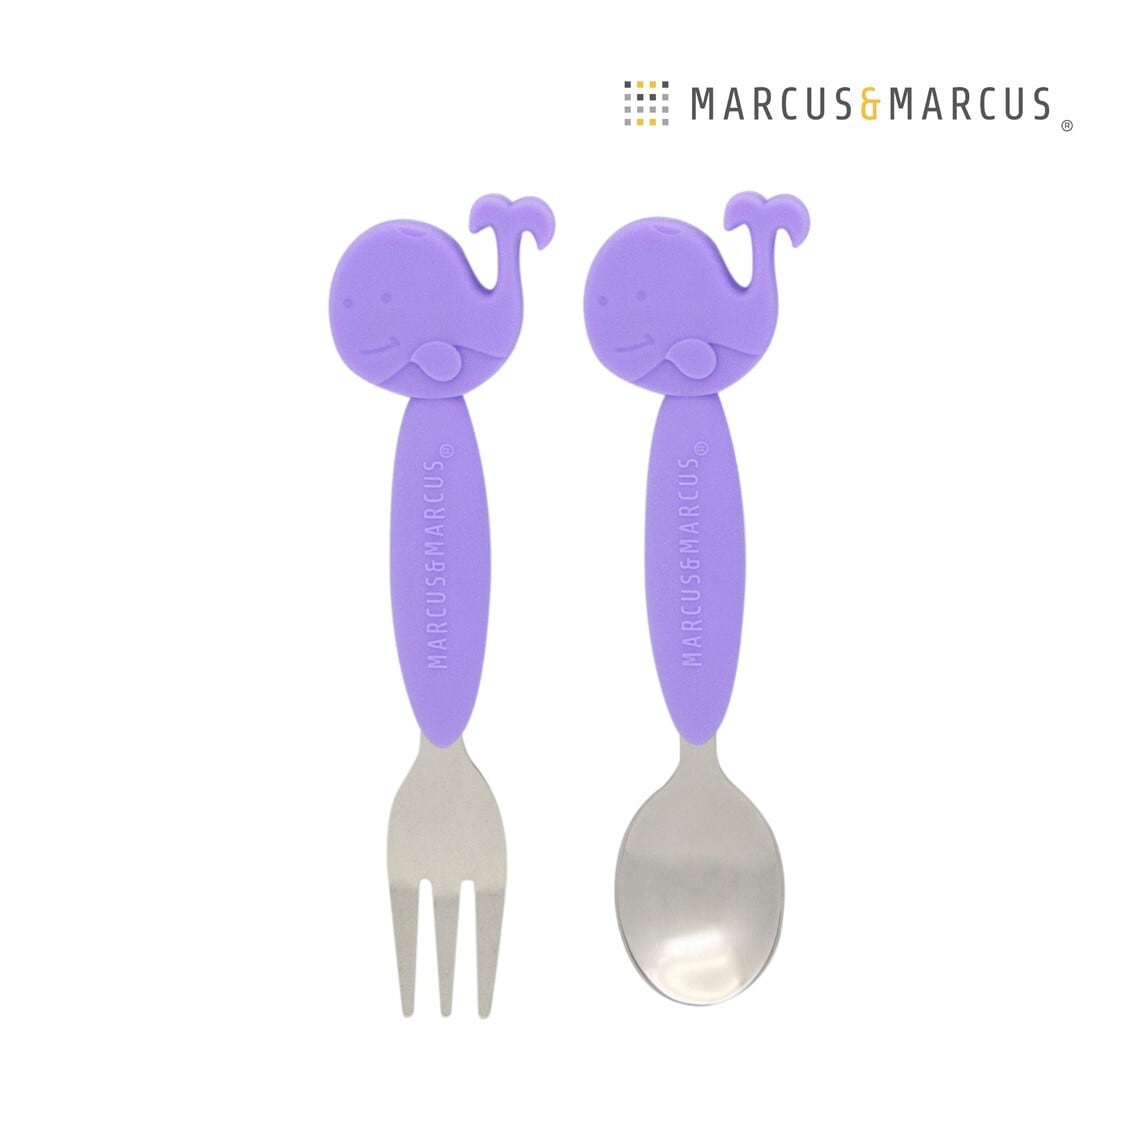 MARCUS&MARCUS / スプーン＆フォーク